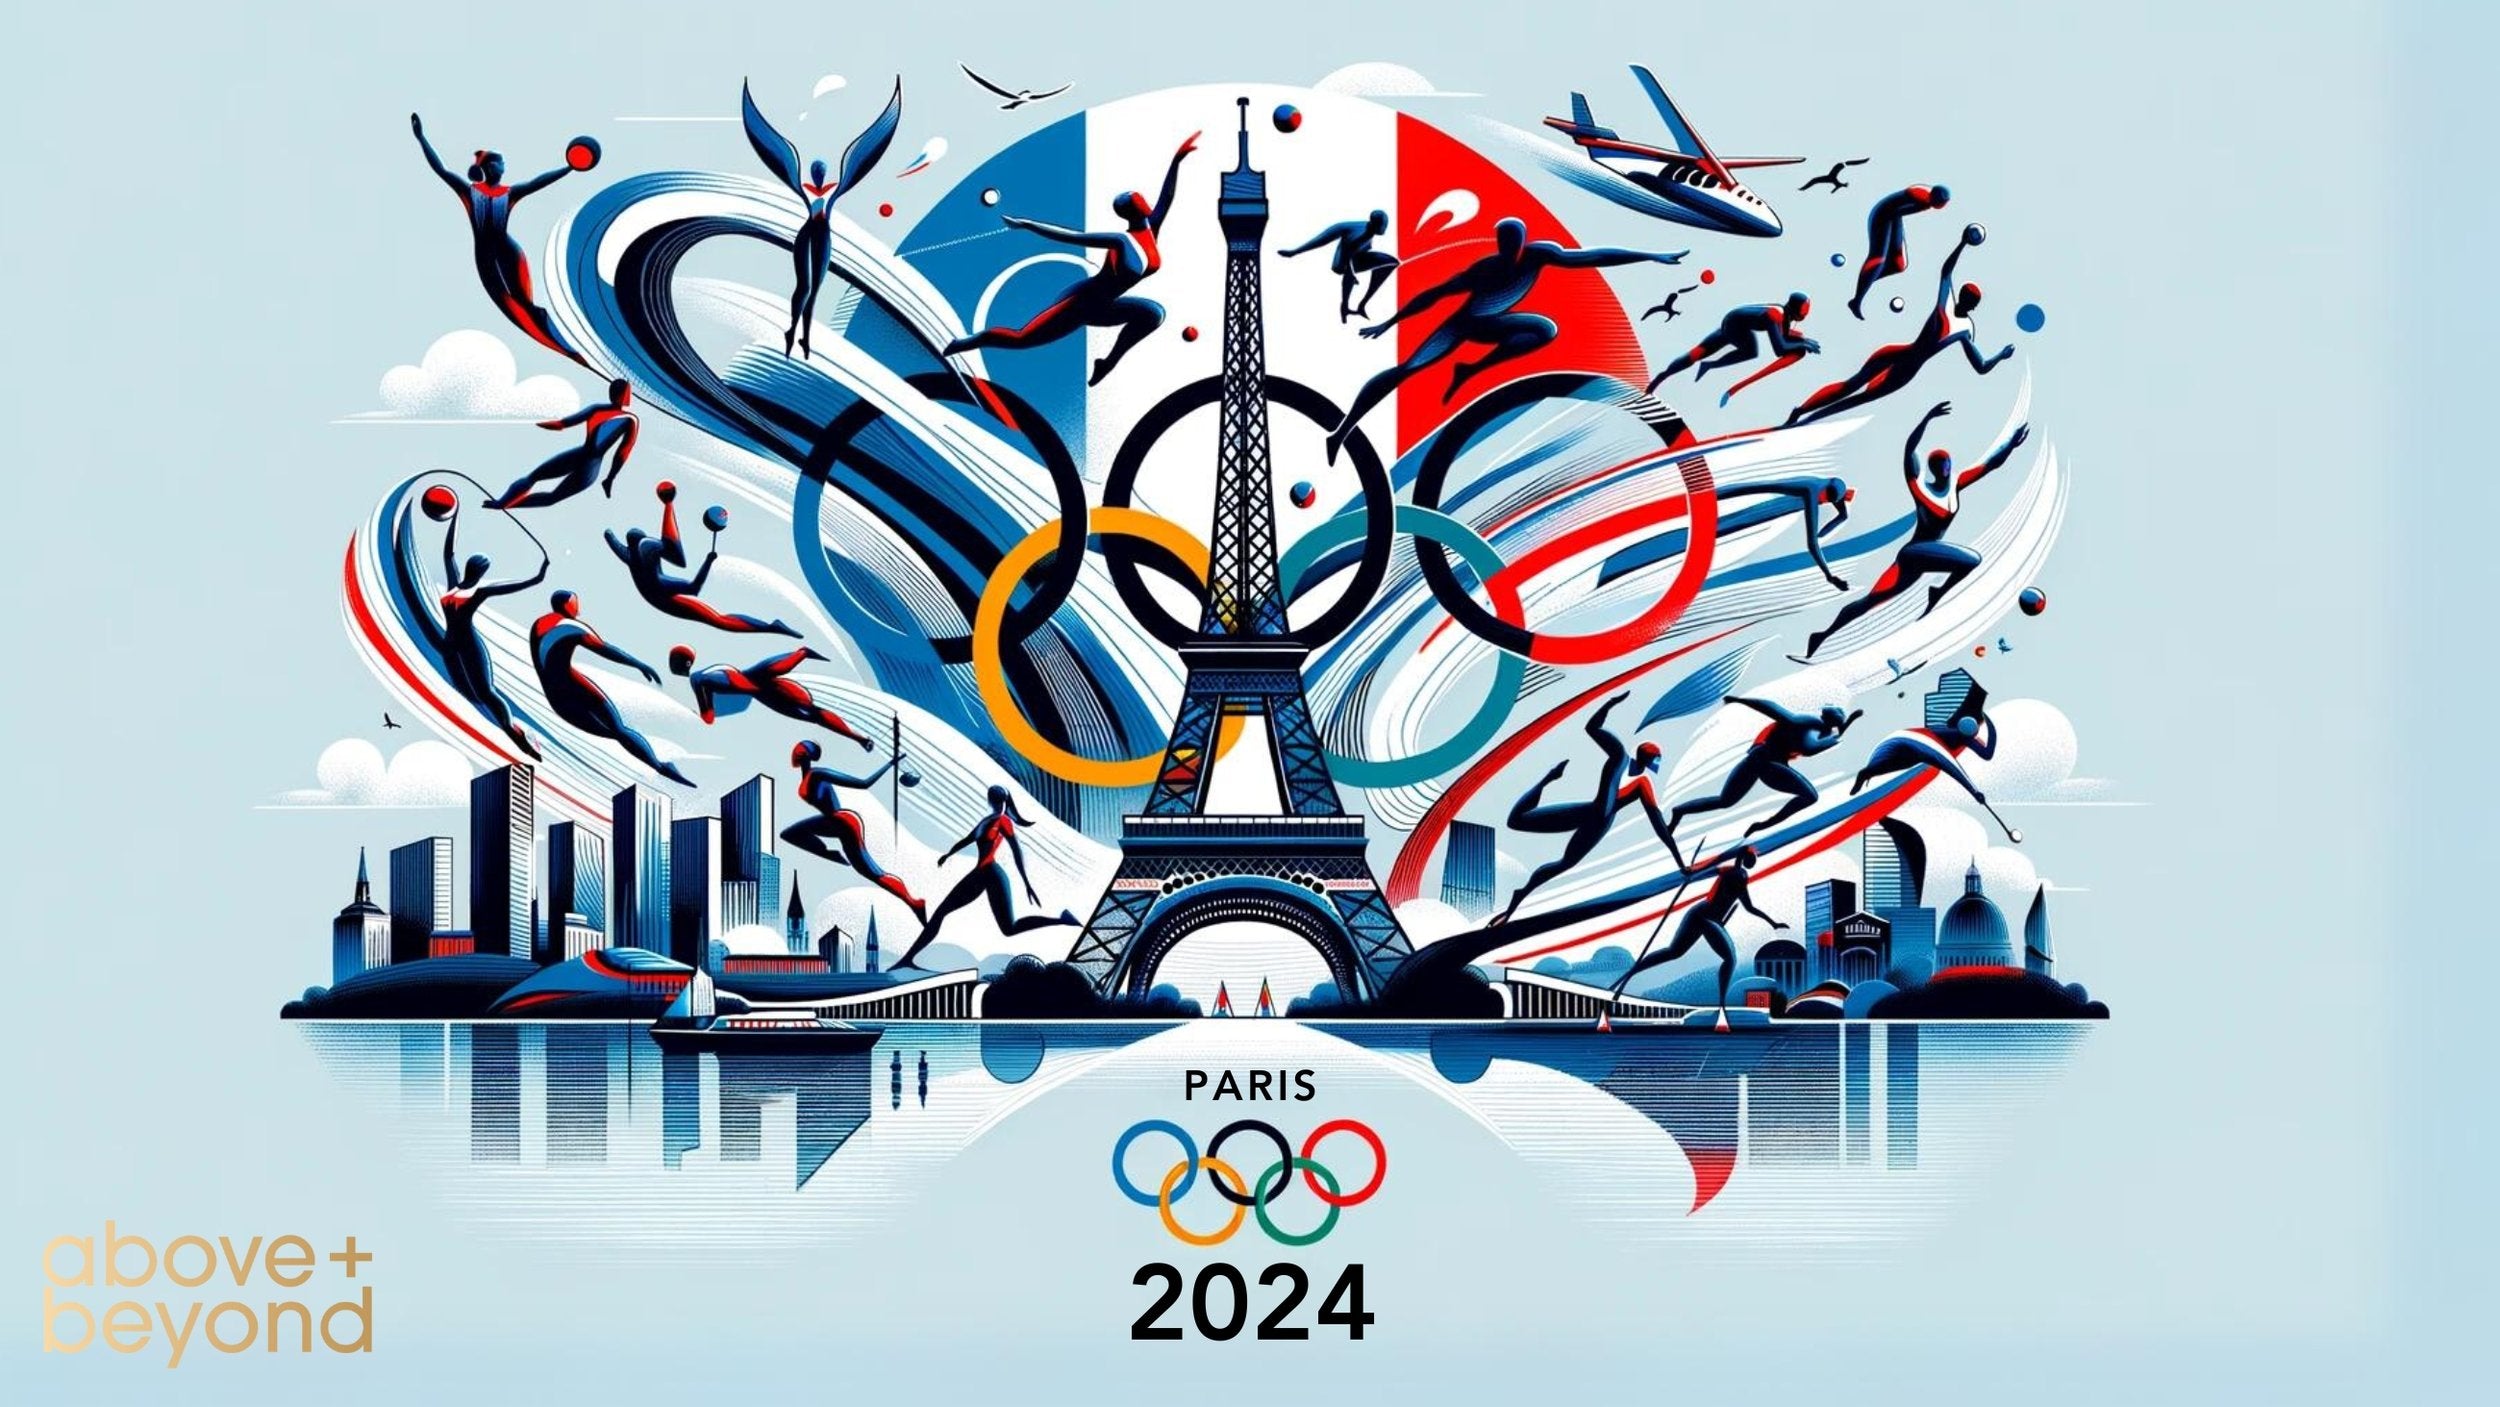 Top 4 Features to Consider When Choosing a Projector for Olympic 2024